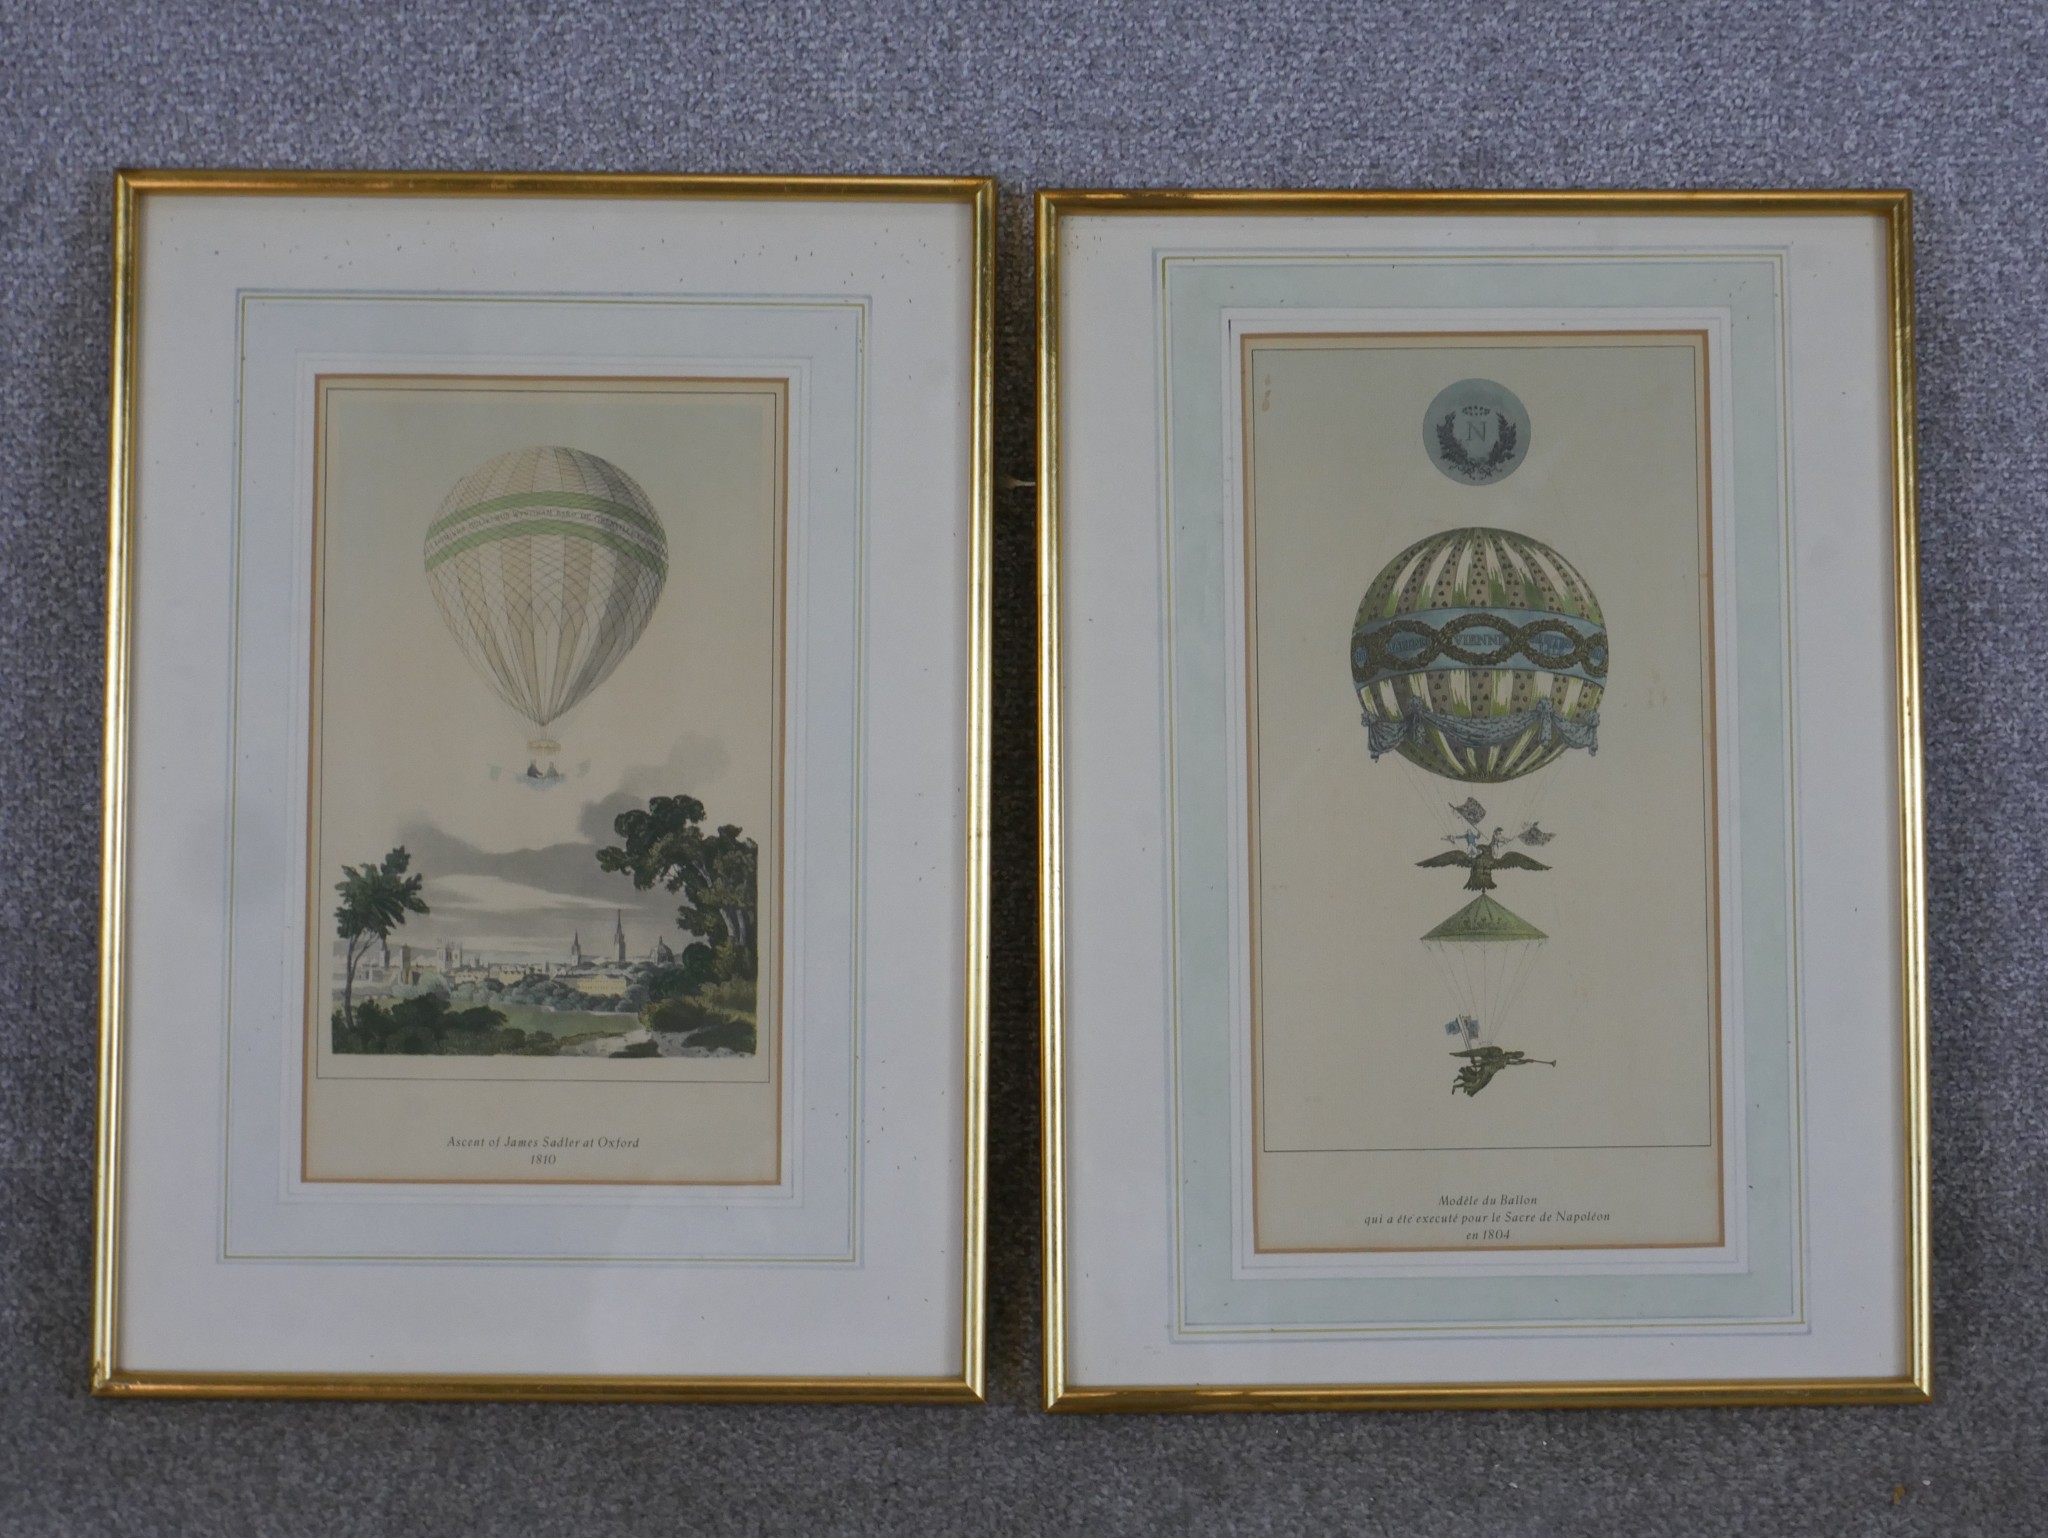 Ascent of James Sadler Two & Modele du Balloon two hot balloon related coloured prints, each